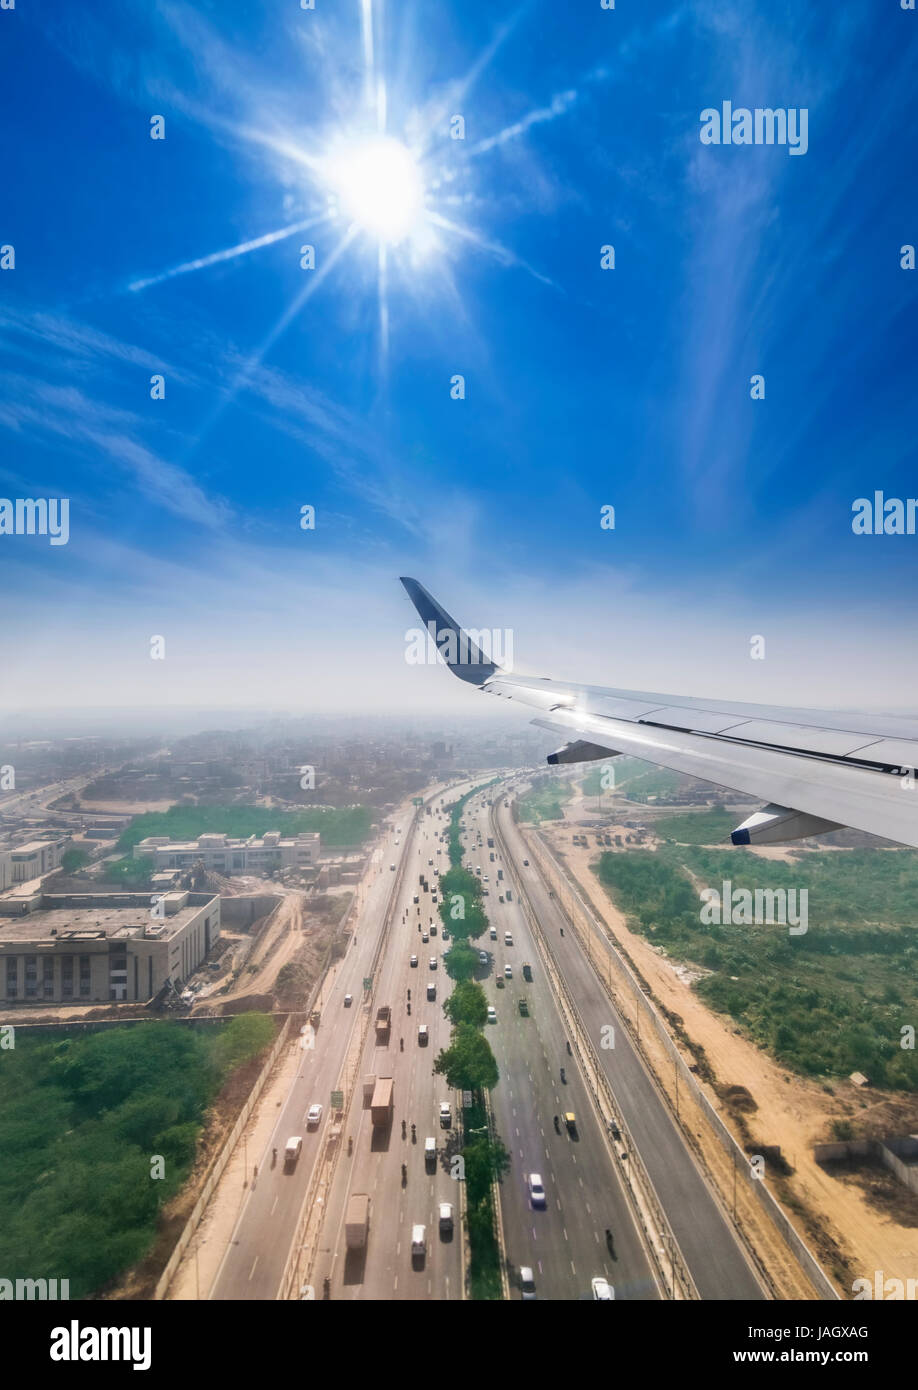 View through the window of a passenger plane flying above Delhi Gurgaon highway, taken just a minute before landing at the New Delhi Airport T3 termin Stock Photo